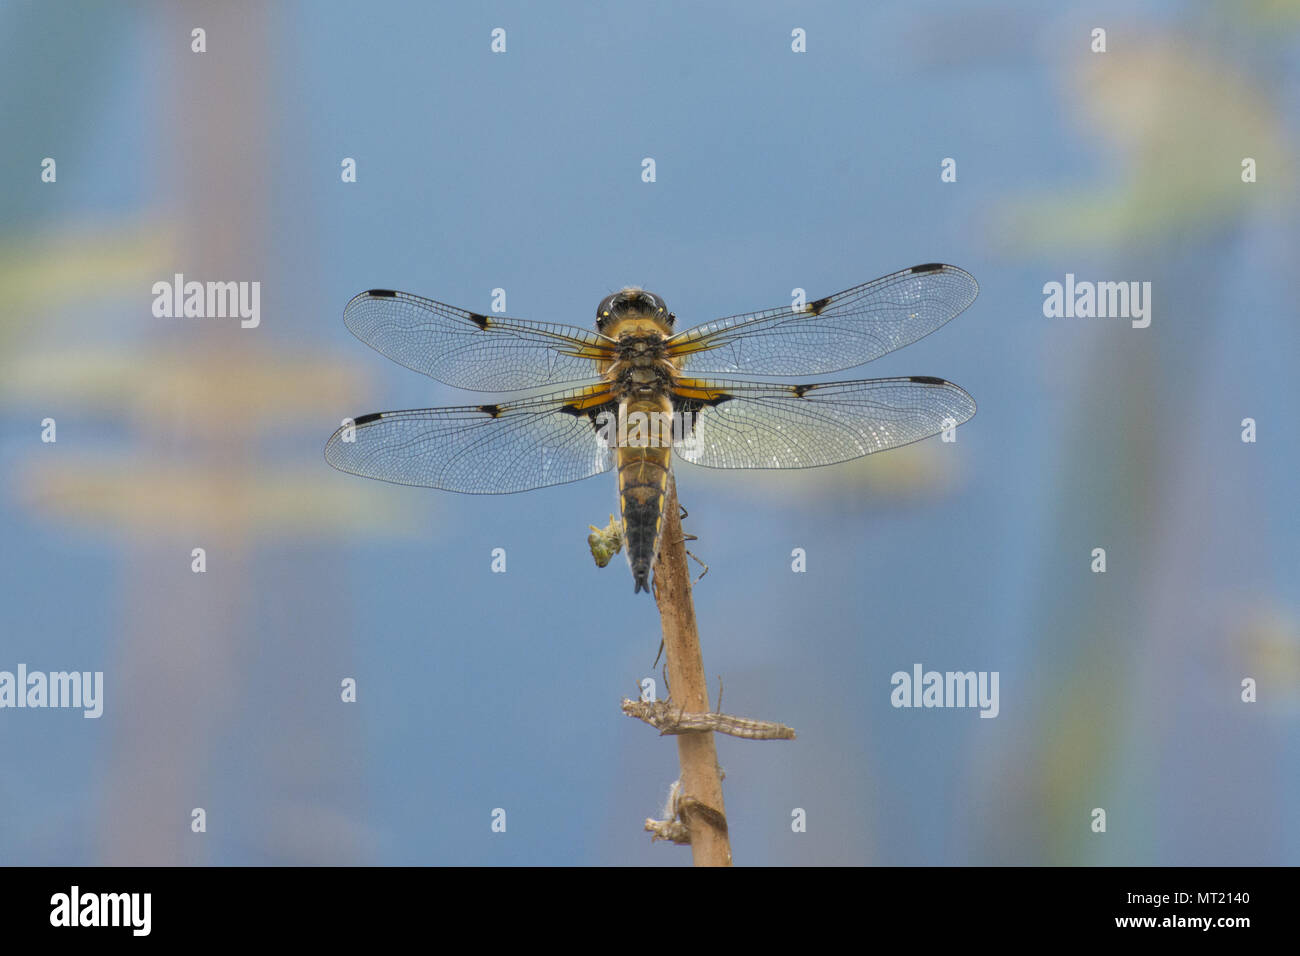 Four-spotted chaser dragonfly (Libellula quadrimaculata) perched over a pond, UK Stock Photo